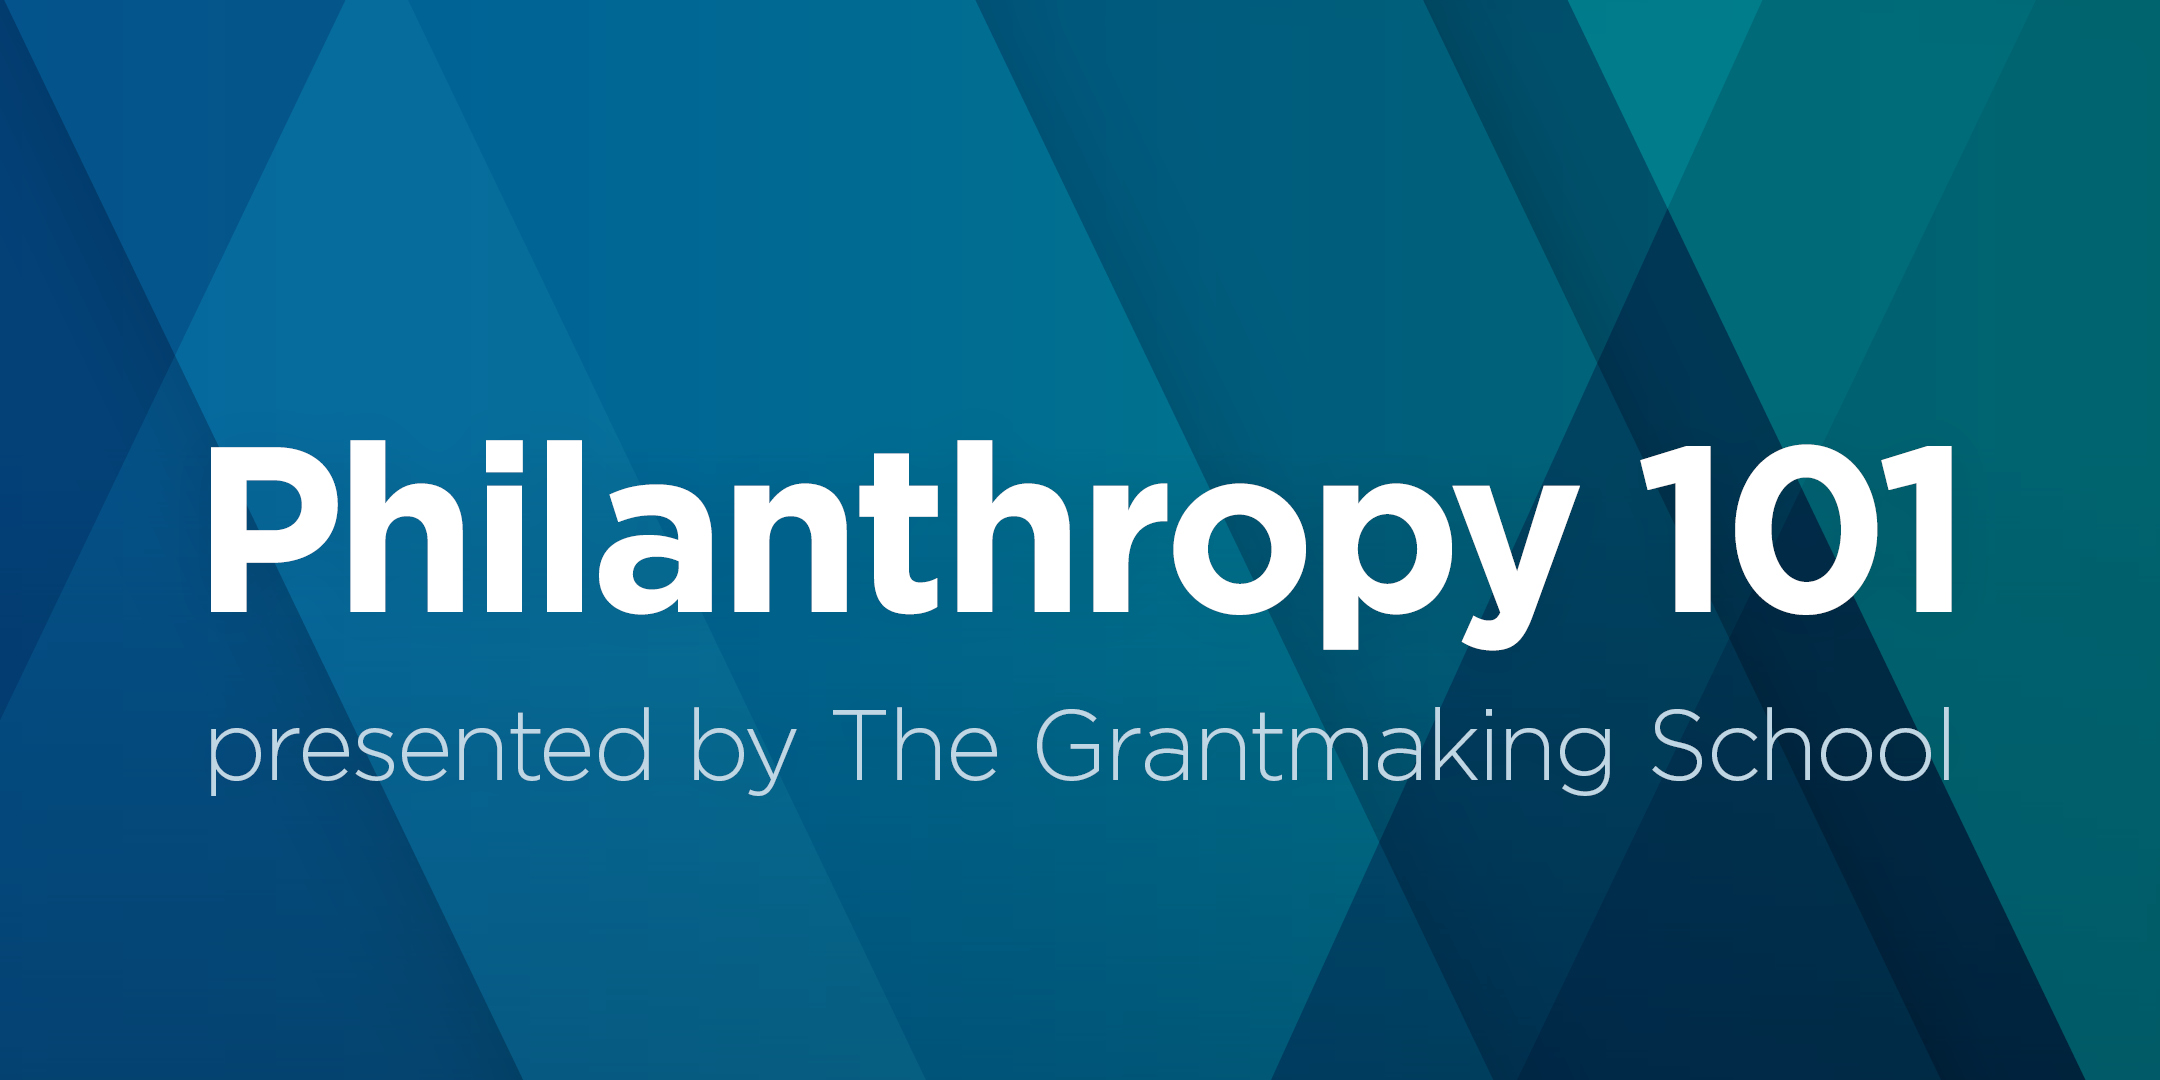 Philanthropy 101, presented by The Grantmaking School